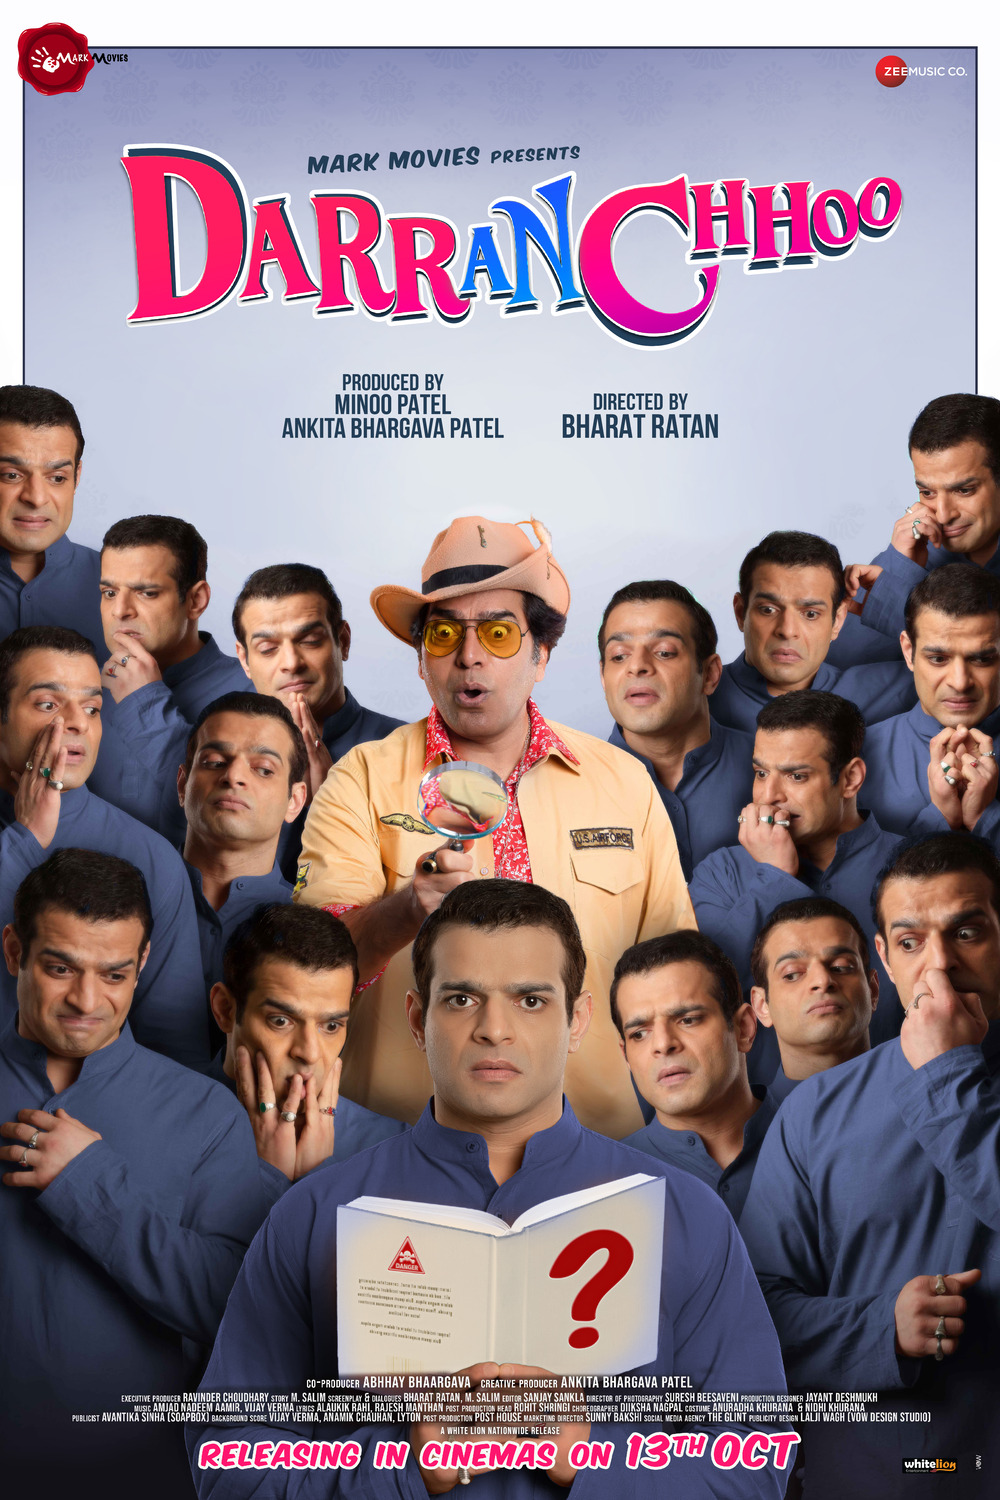 Extra Large Movie Poster Image for Darran Chhoo (#3 of 4)